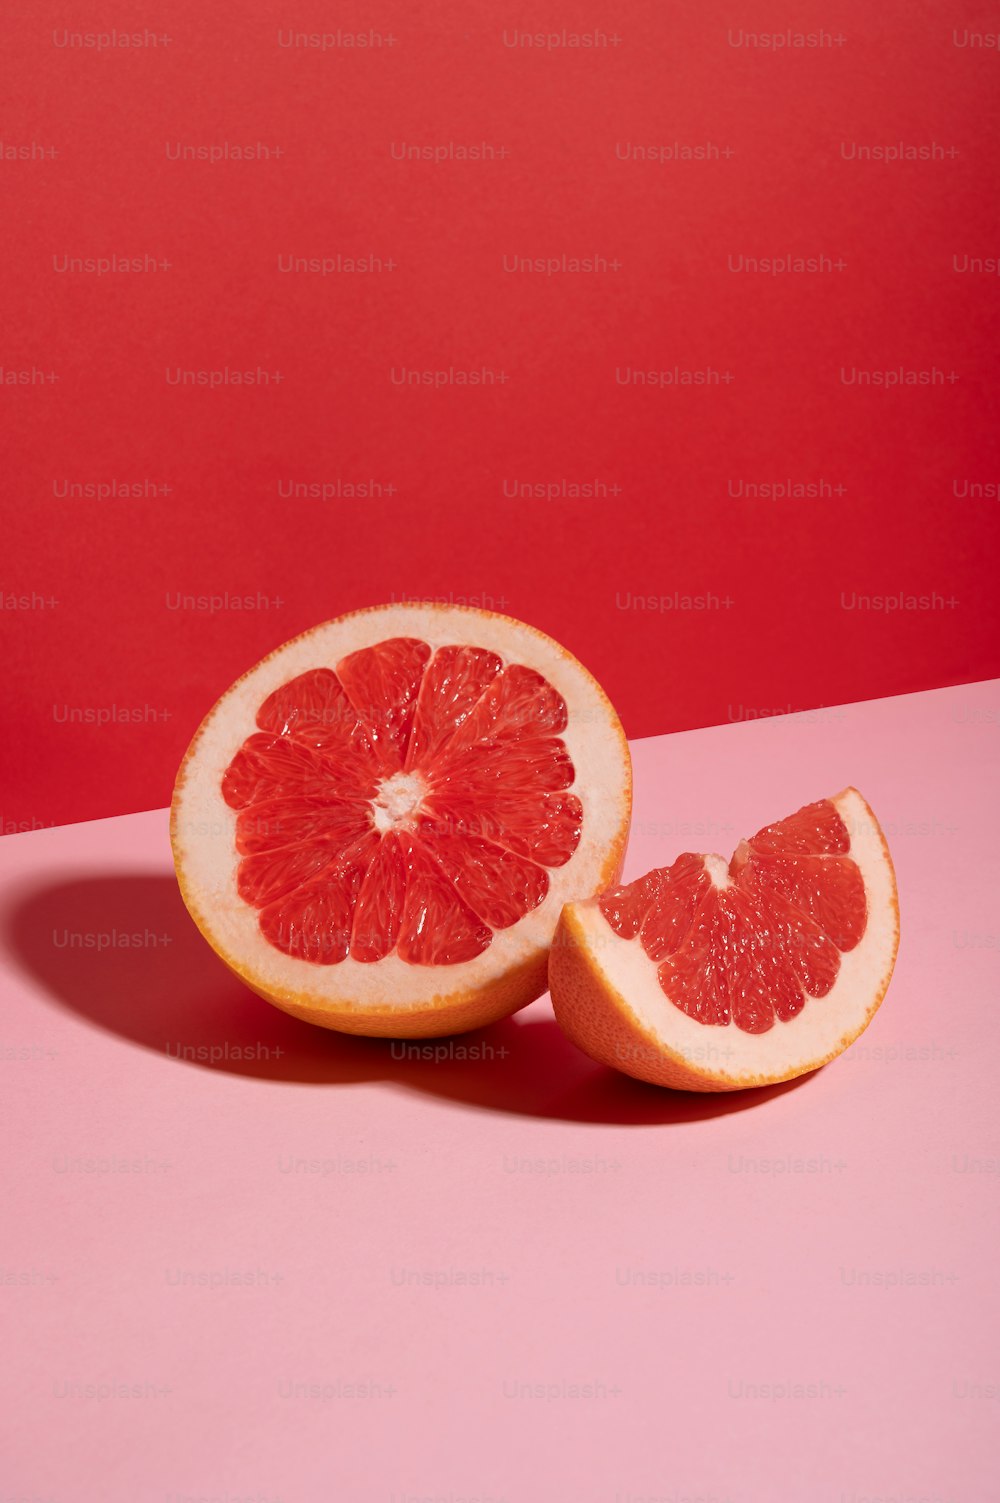 a grapefruit cut in half on a pink surface